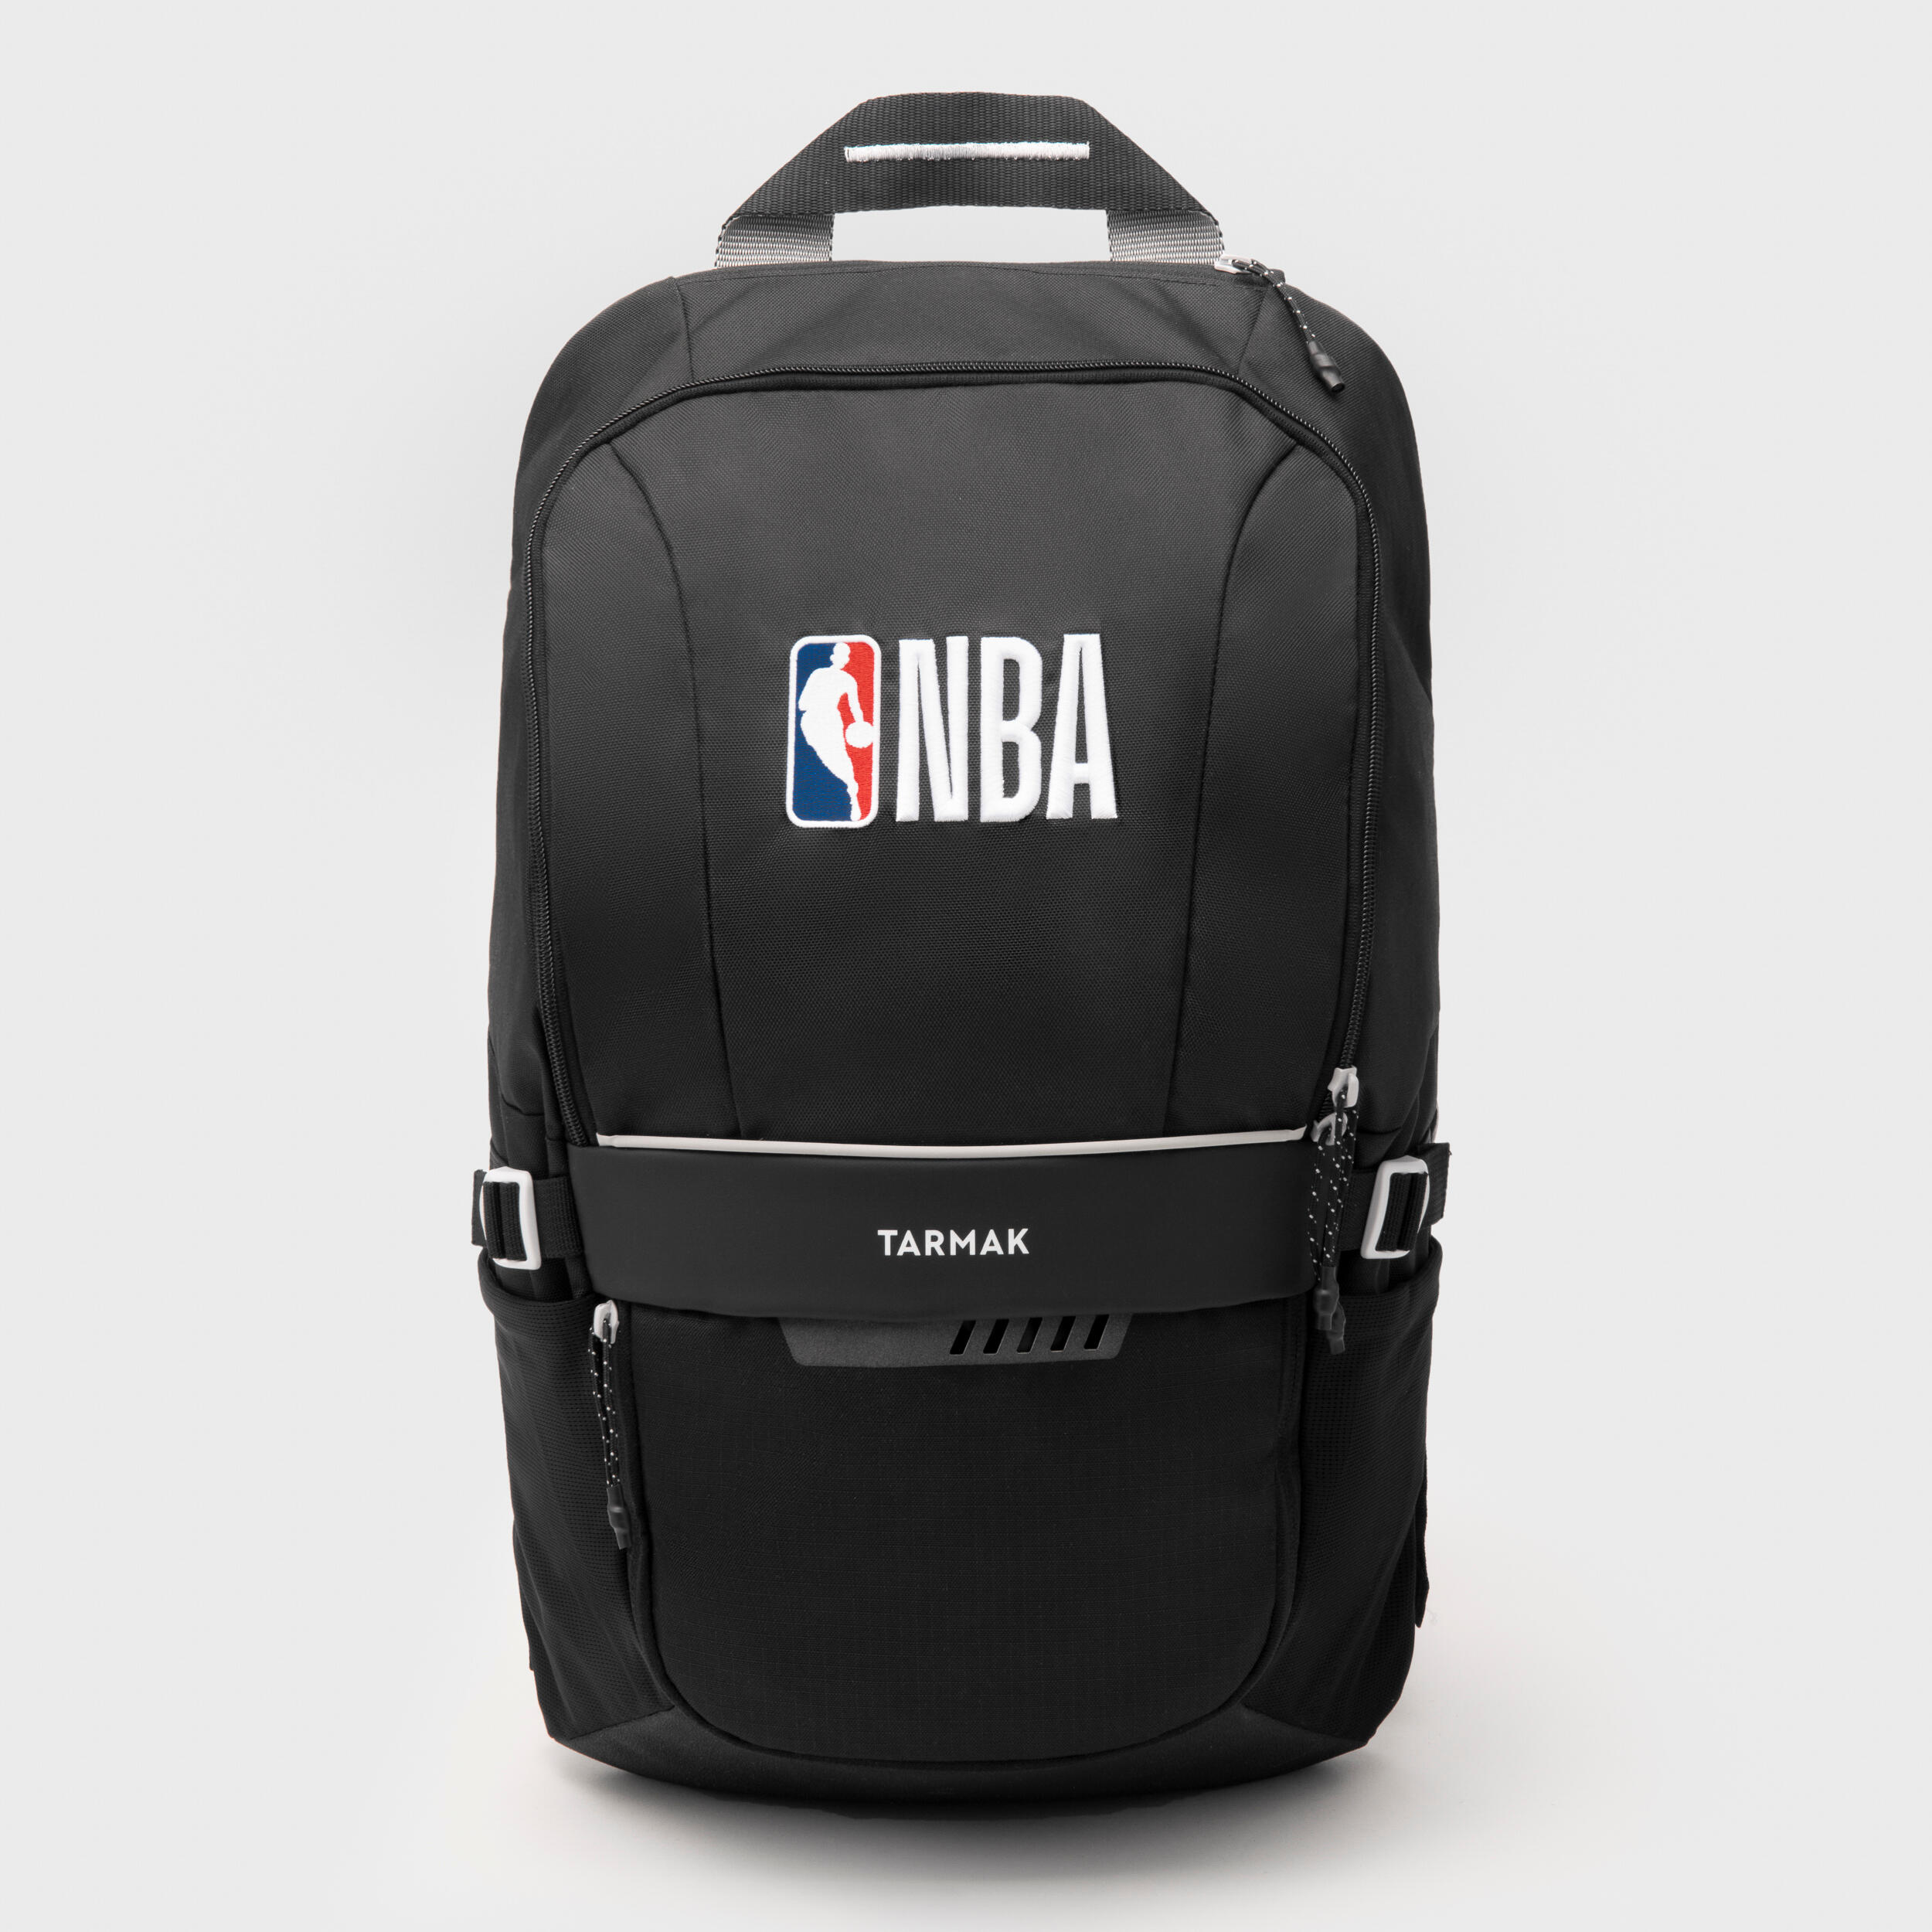 Buy American Tourister Red Casual Backpack (Dribble NBA  Backpack_8901836116793) at Amazon.in